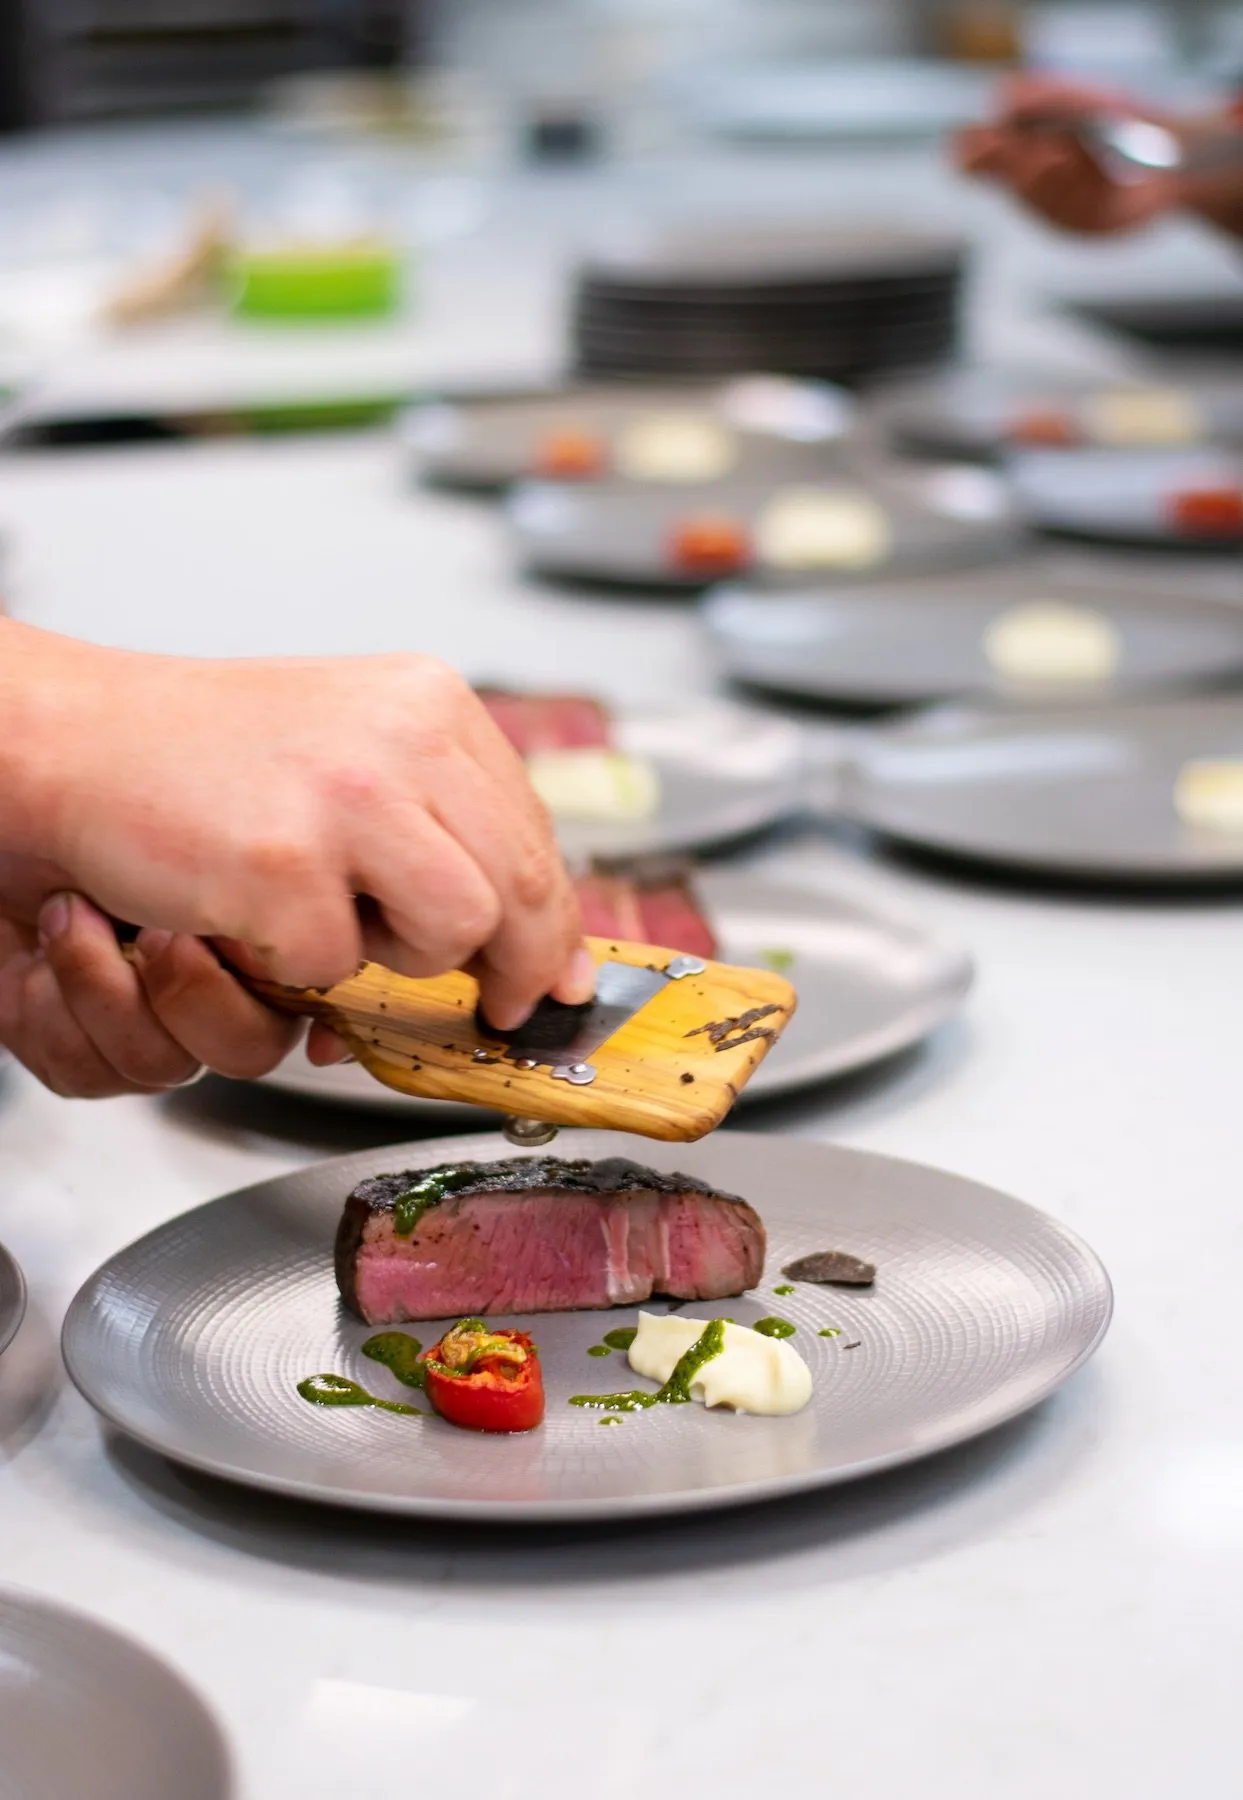 A chef garnishes a plate of steak